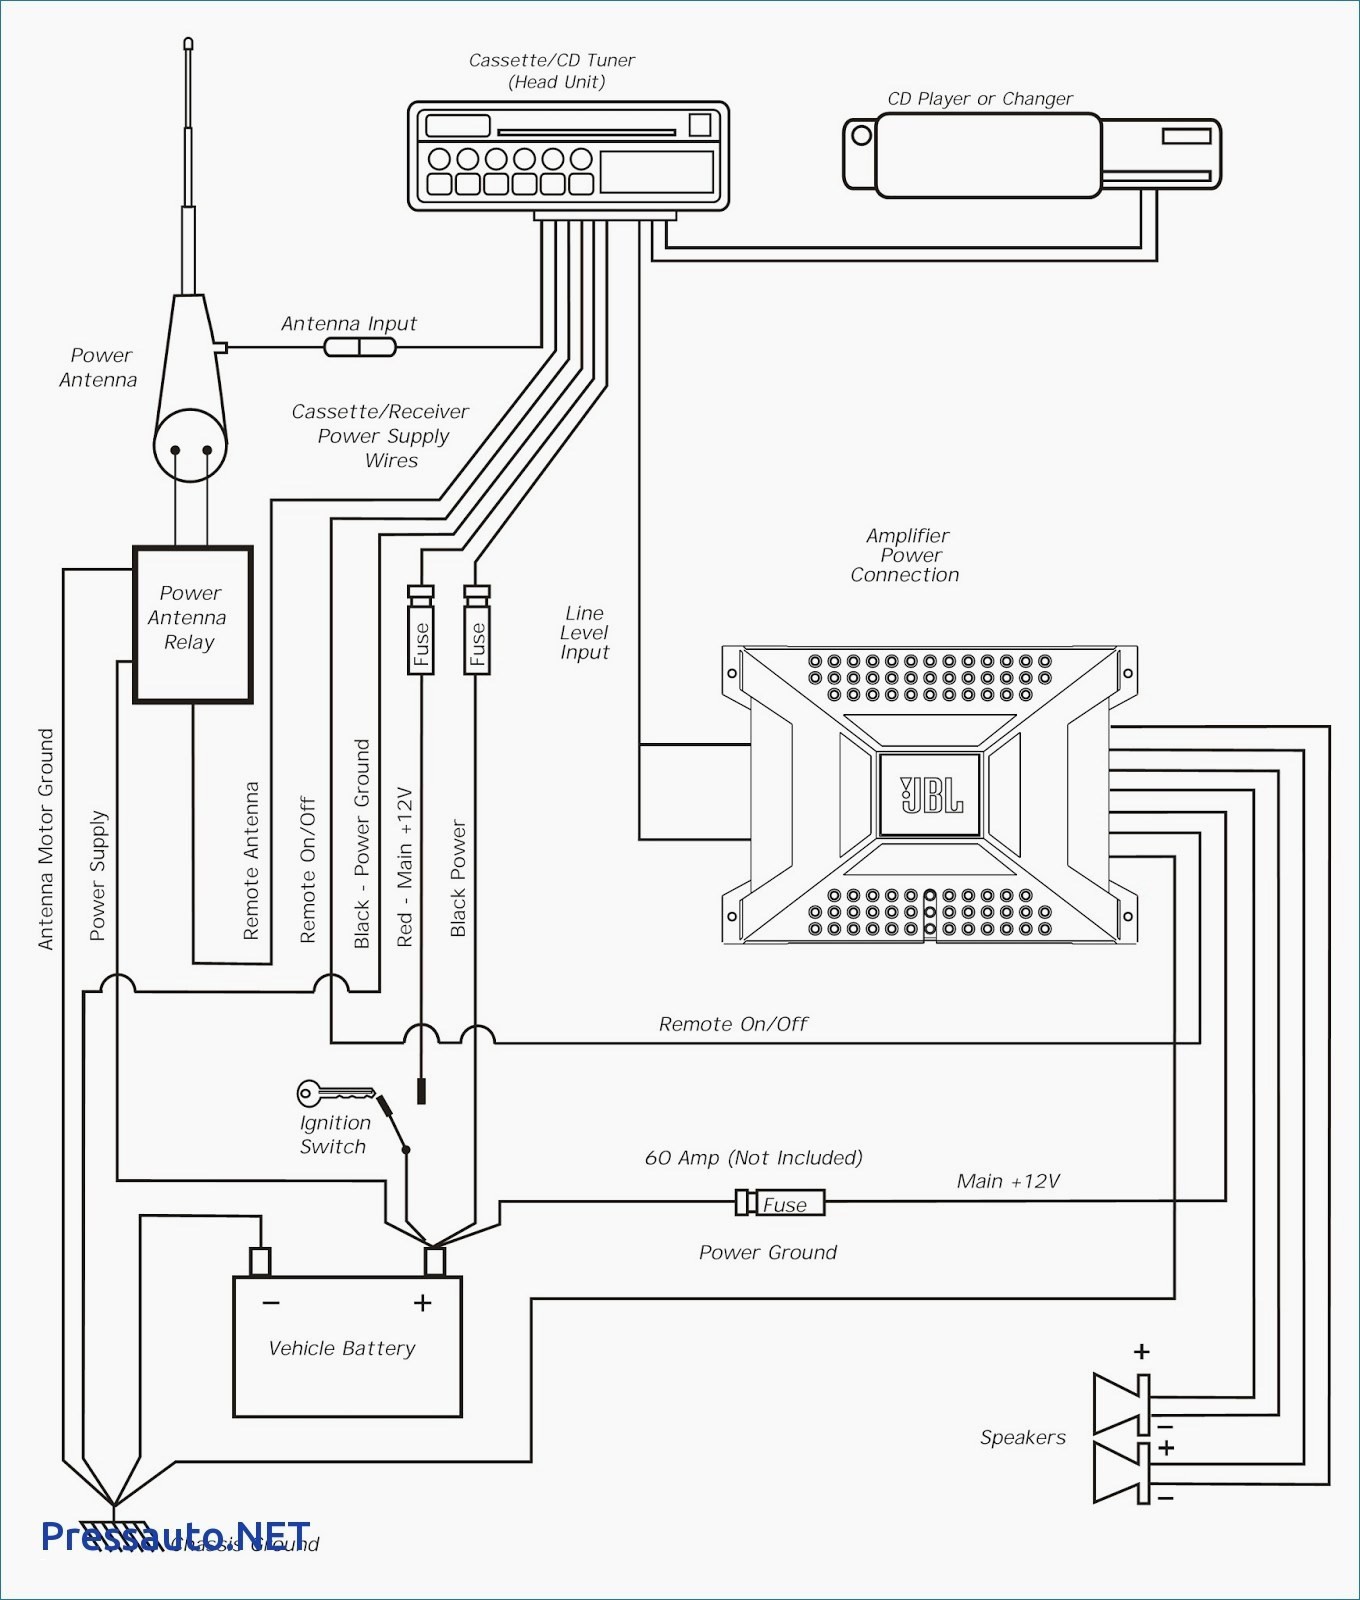 Bose Amplifier Wiring Diagram Save New Wiring Diagram For Amp To Head Unit